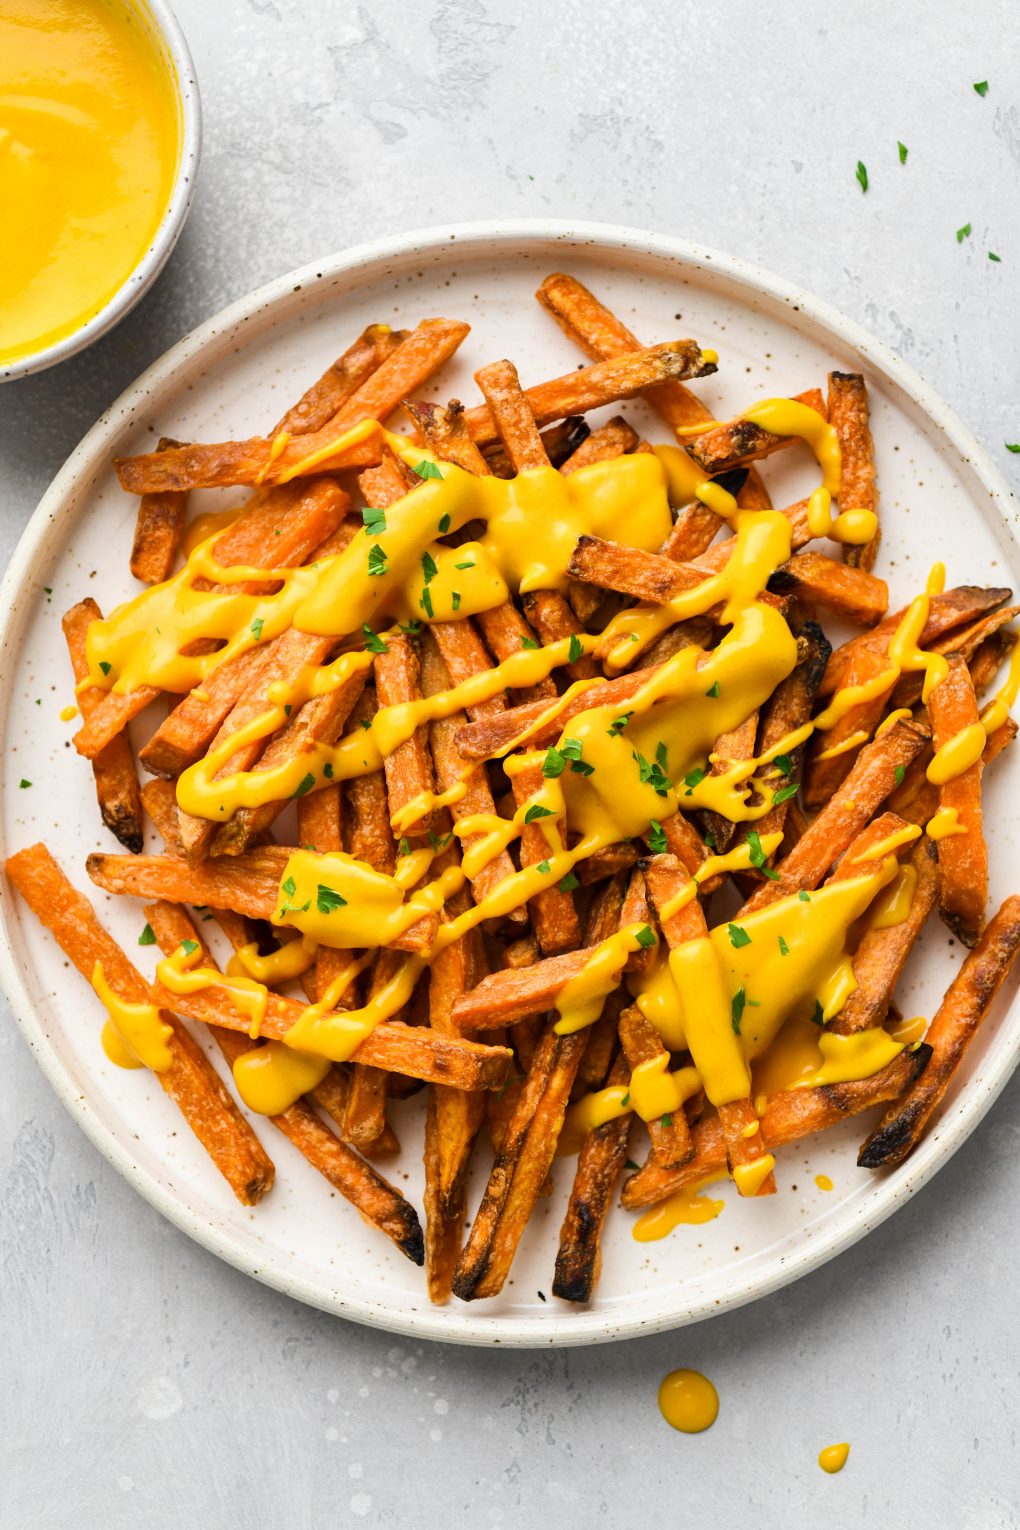 Image of cheese sauce drizzled over sweet potato fries on a white speckled plate.